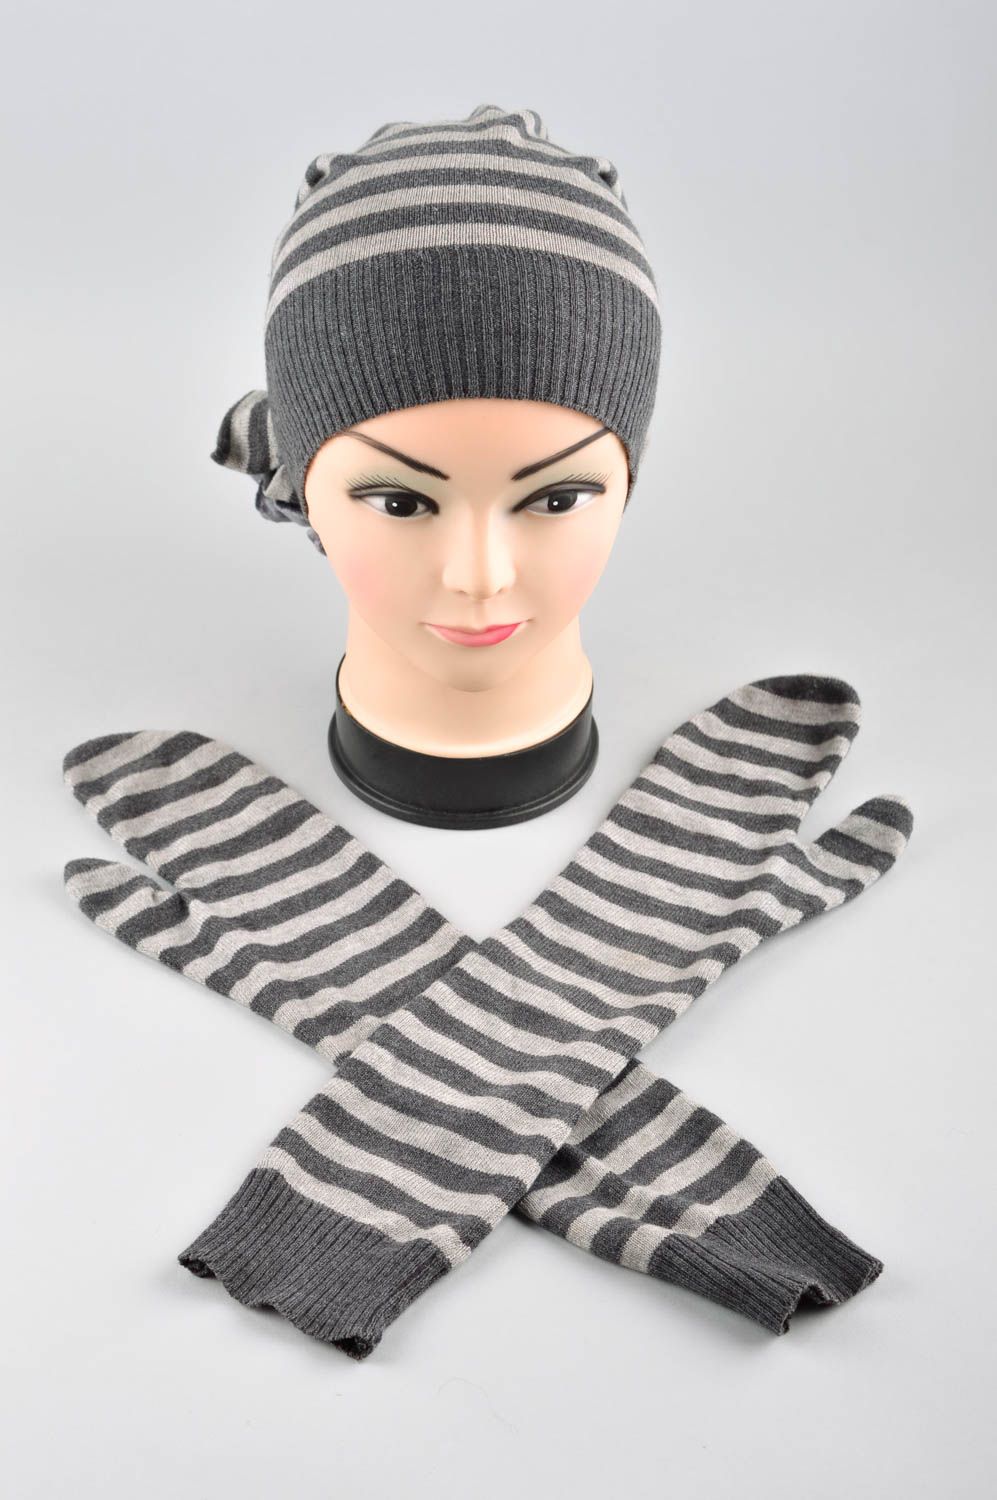 Striped handmade hat womens mittens fashion accessories winter outfits photo 1